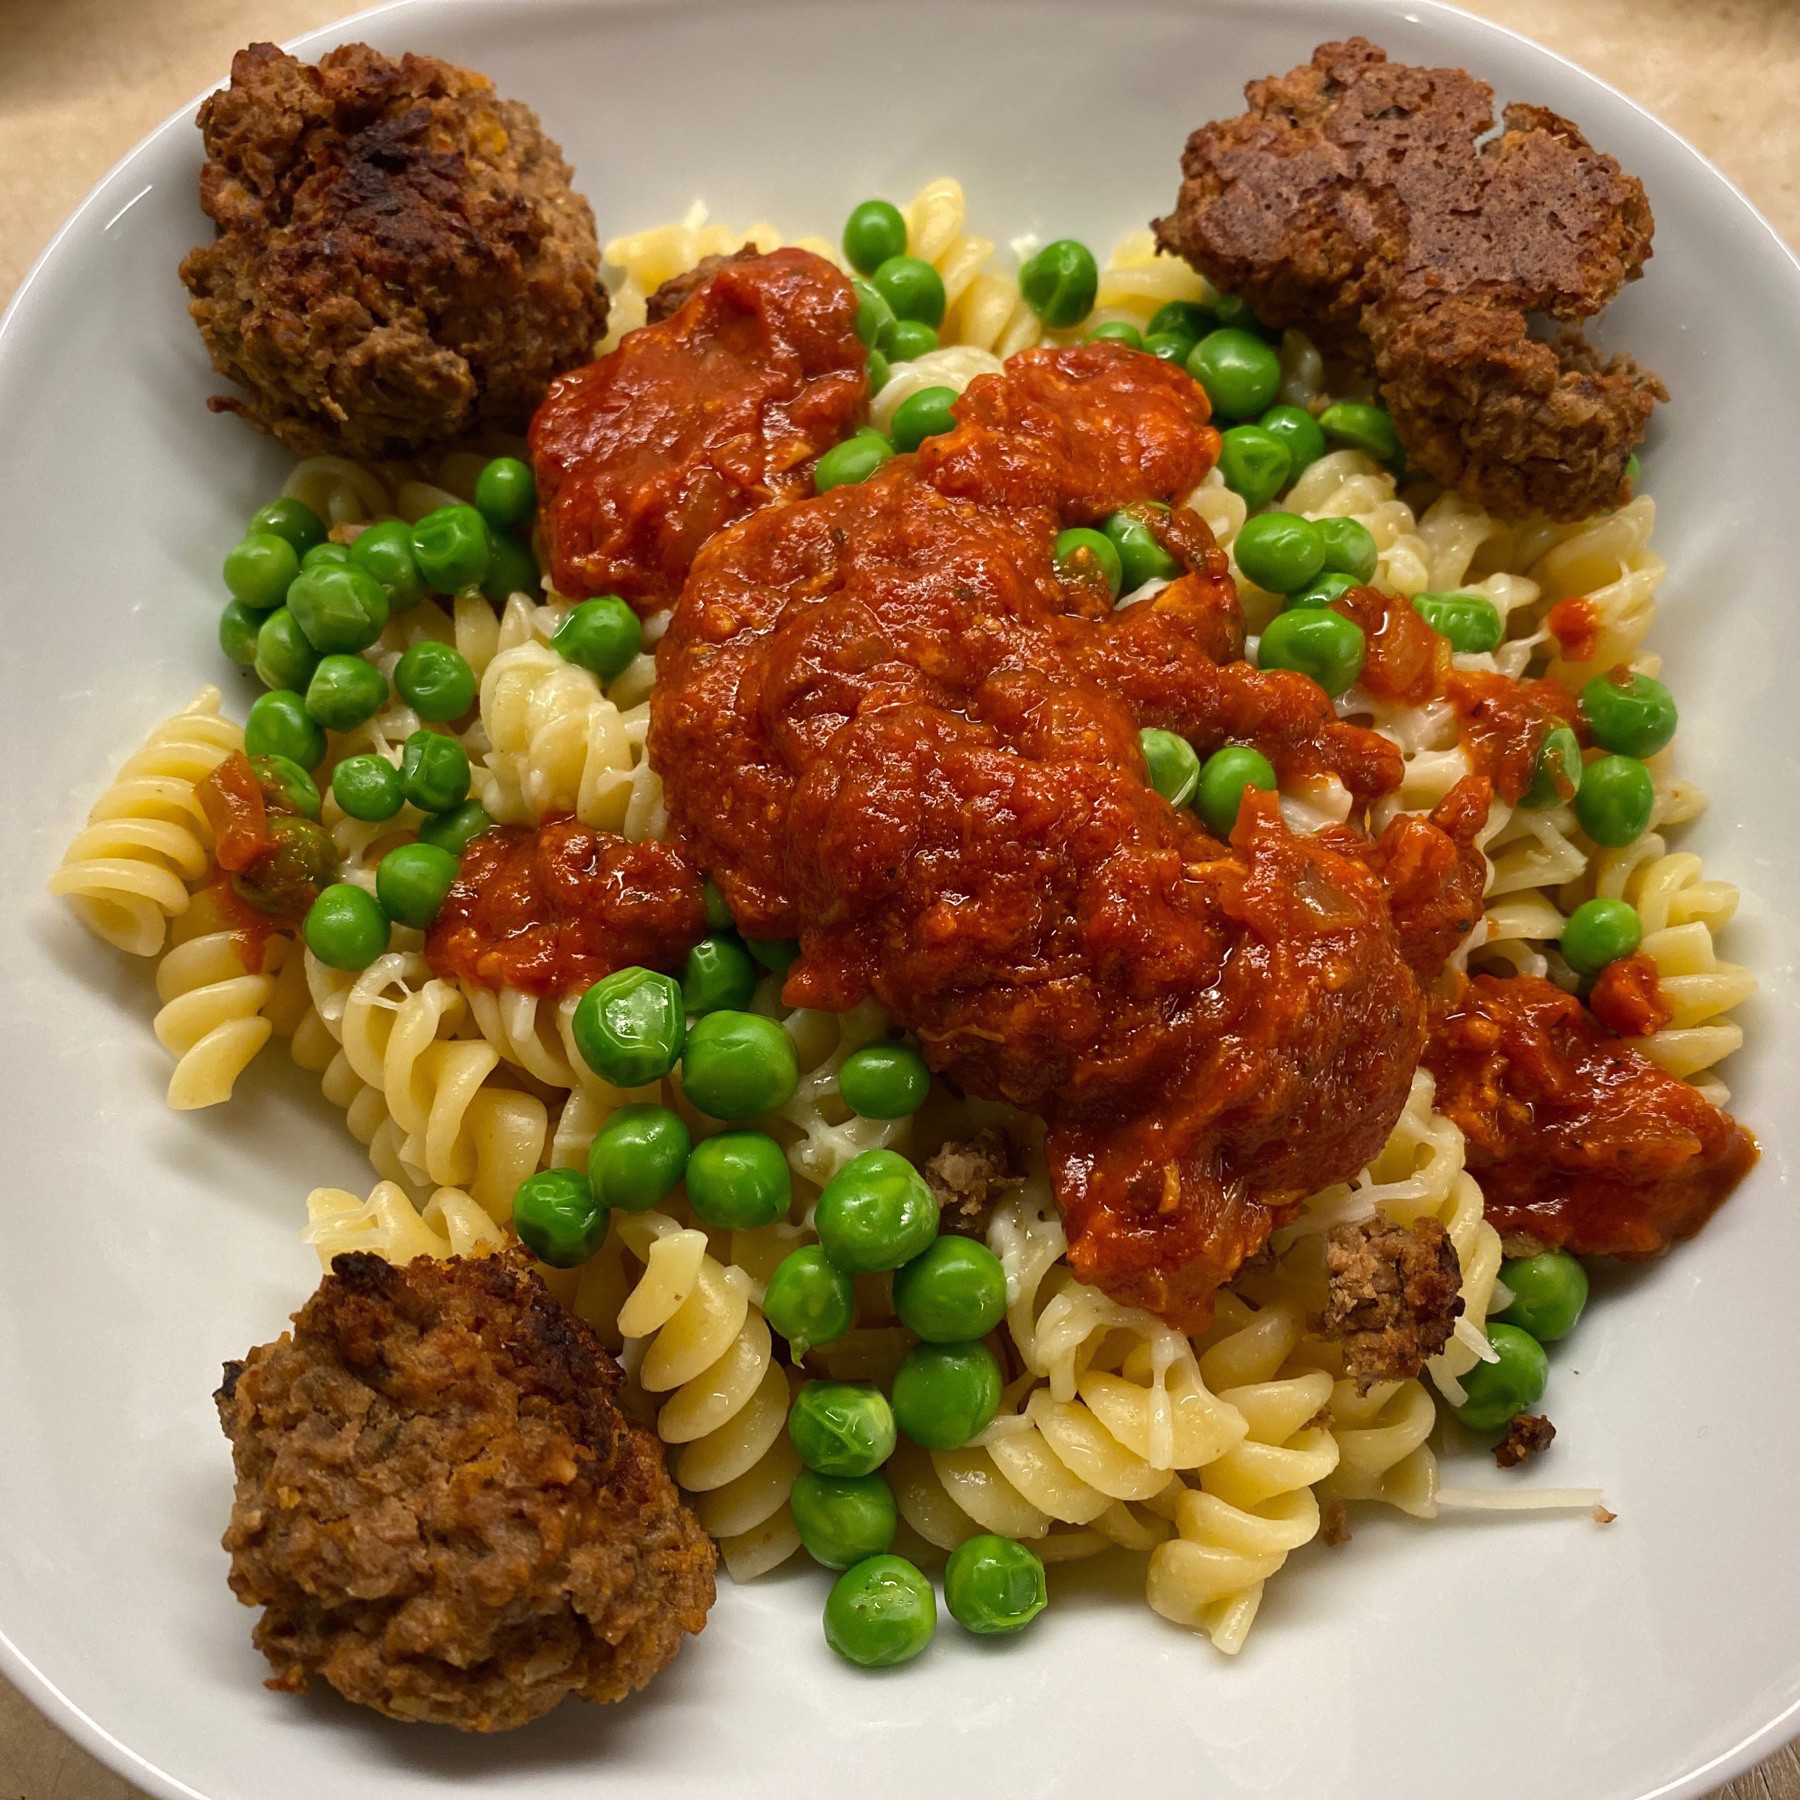 Pasta, peas, lentil balls, and sauce in a bowl.